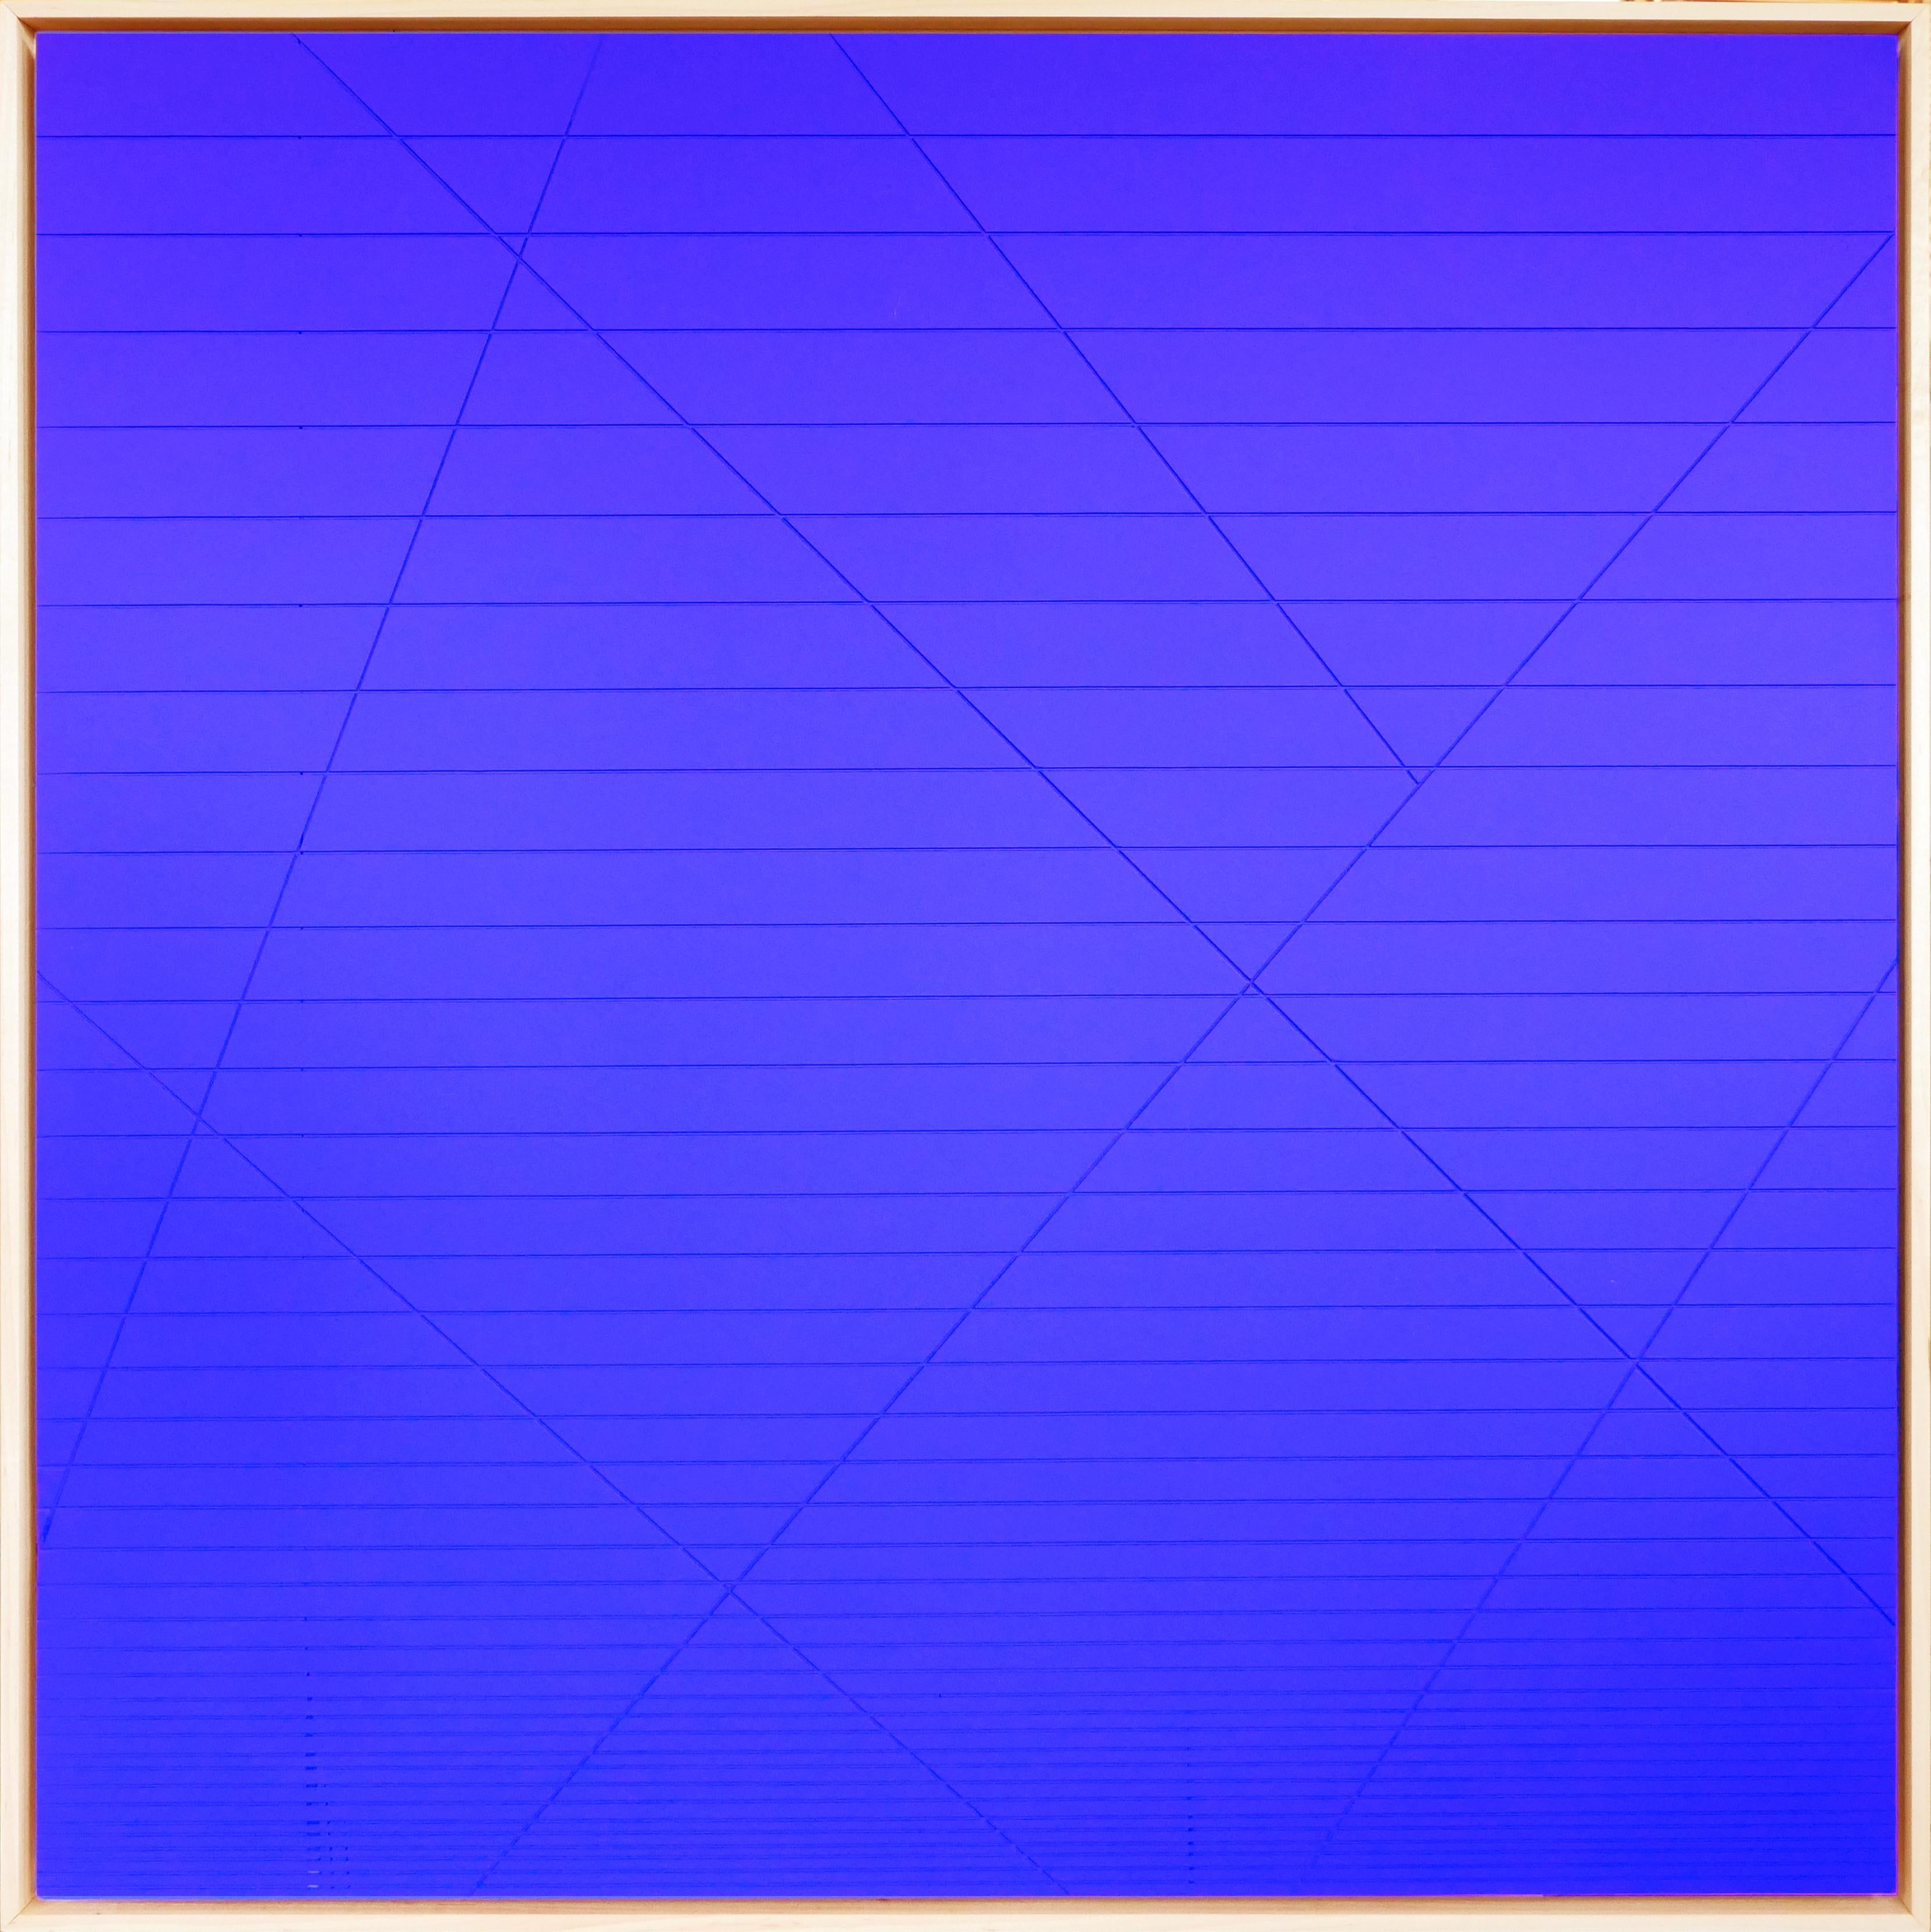 Contemporary Abstract Bright Blue Geometric Linear Groove Painting / Sculpture